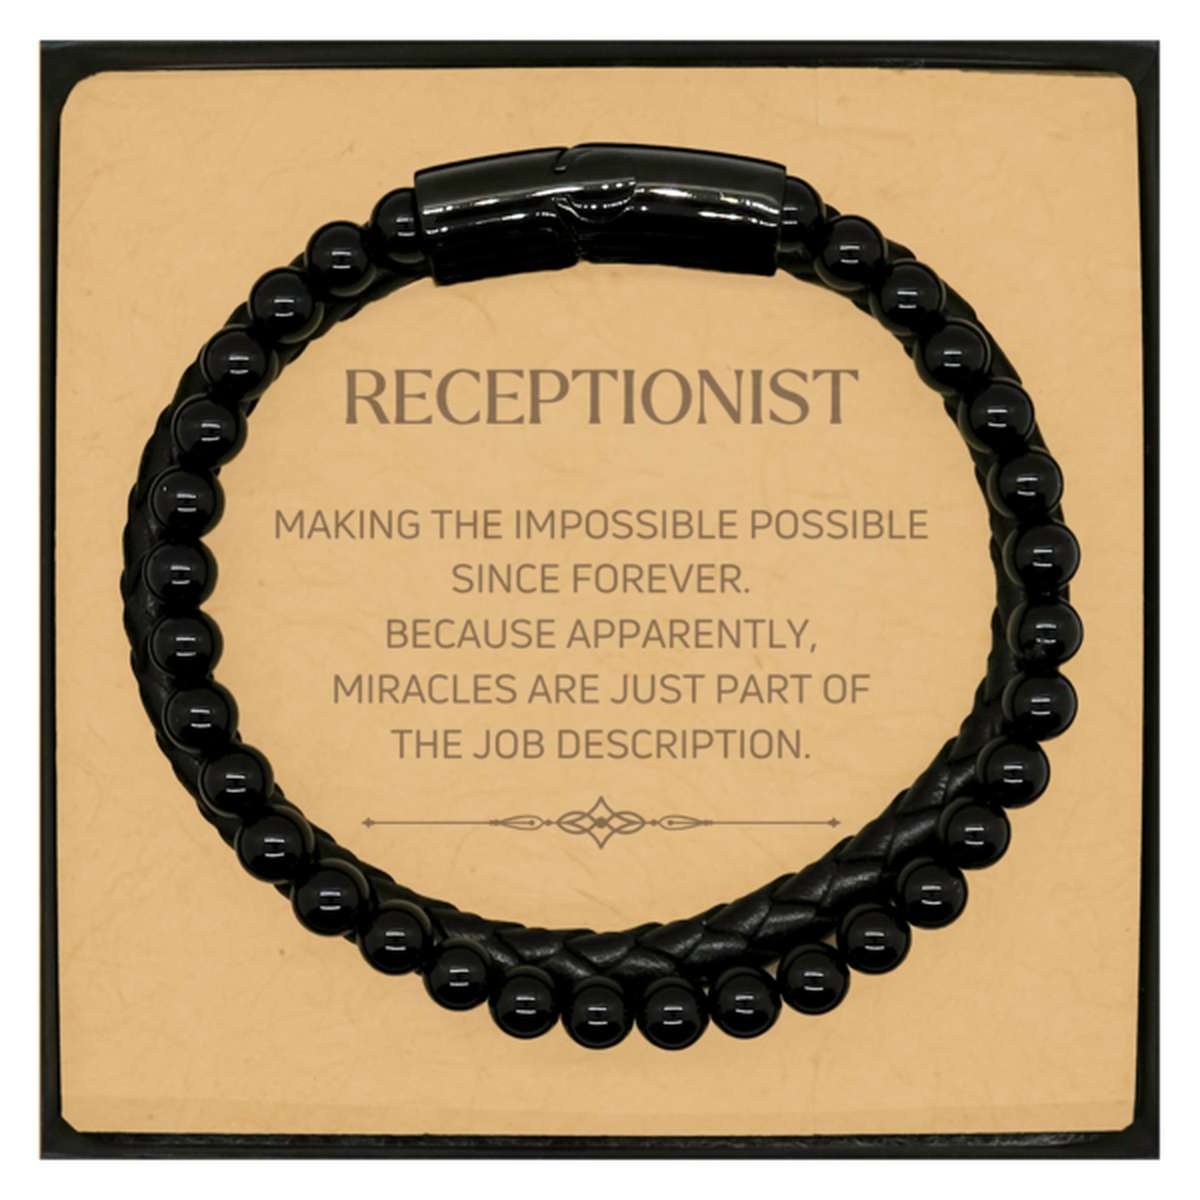 Funny Receptionist Gifts, Miracles are just part of the job description, Inspirational Birthday Christmas Stone Leather Bracelets For Receptionist, Men, Women, Coworkers, Friends, Boss